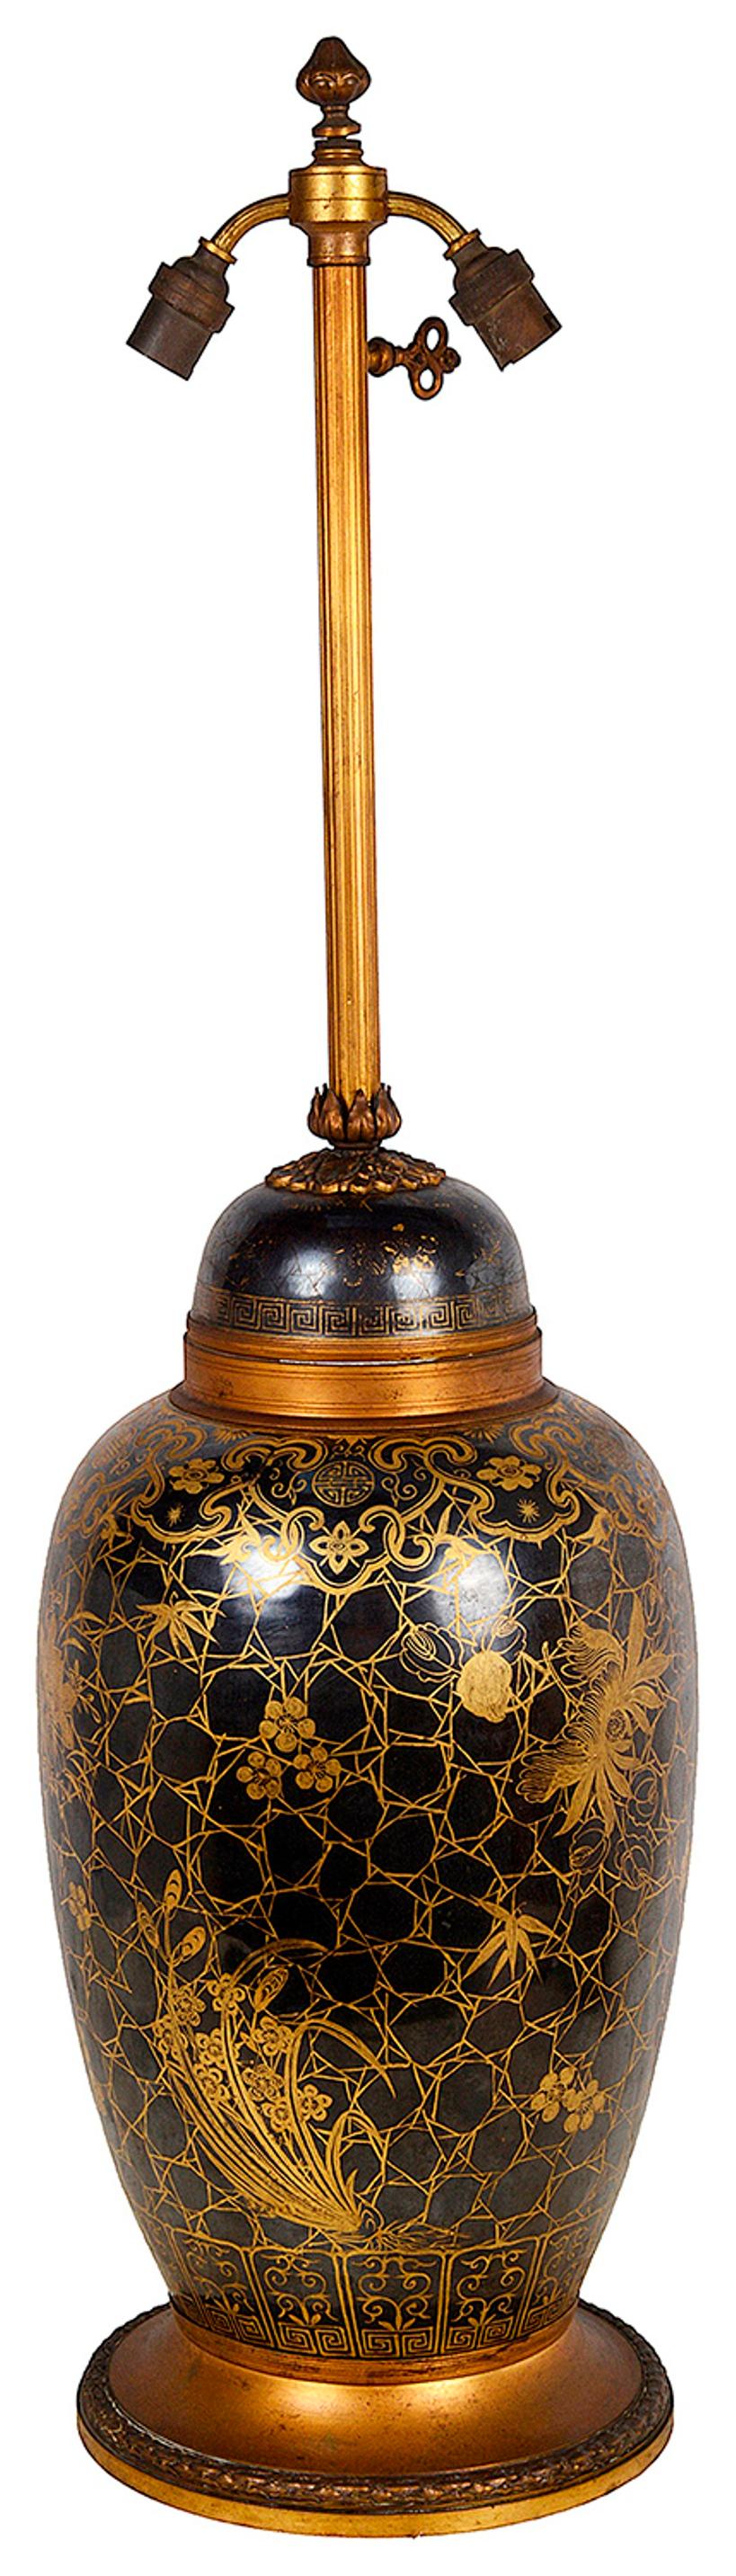 A very decorative 19th Century Chinese Famille Noure lidded vase with classical gilded floral and motif decoration to the whole. Mounted with gilded ormolu base and light fitting.